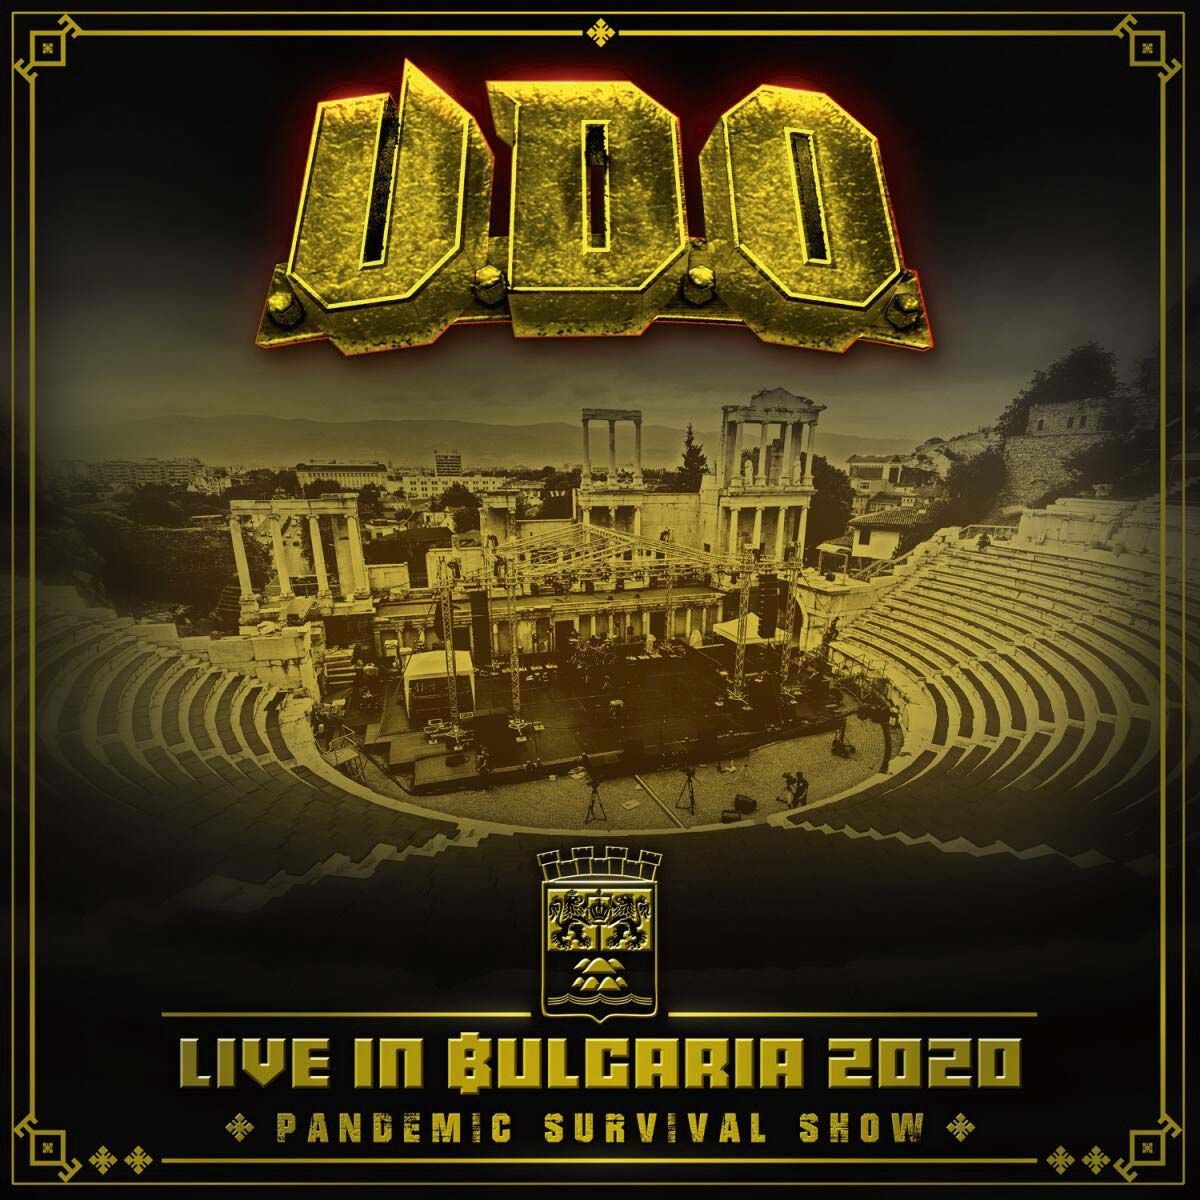 U.D.O. - Live In Bulgaria 2020 – The Pandemic Survival Show